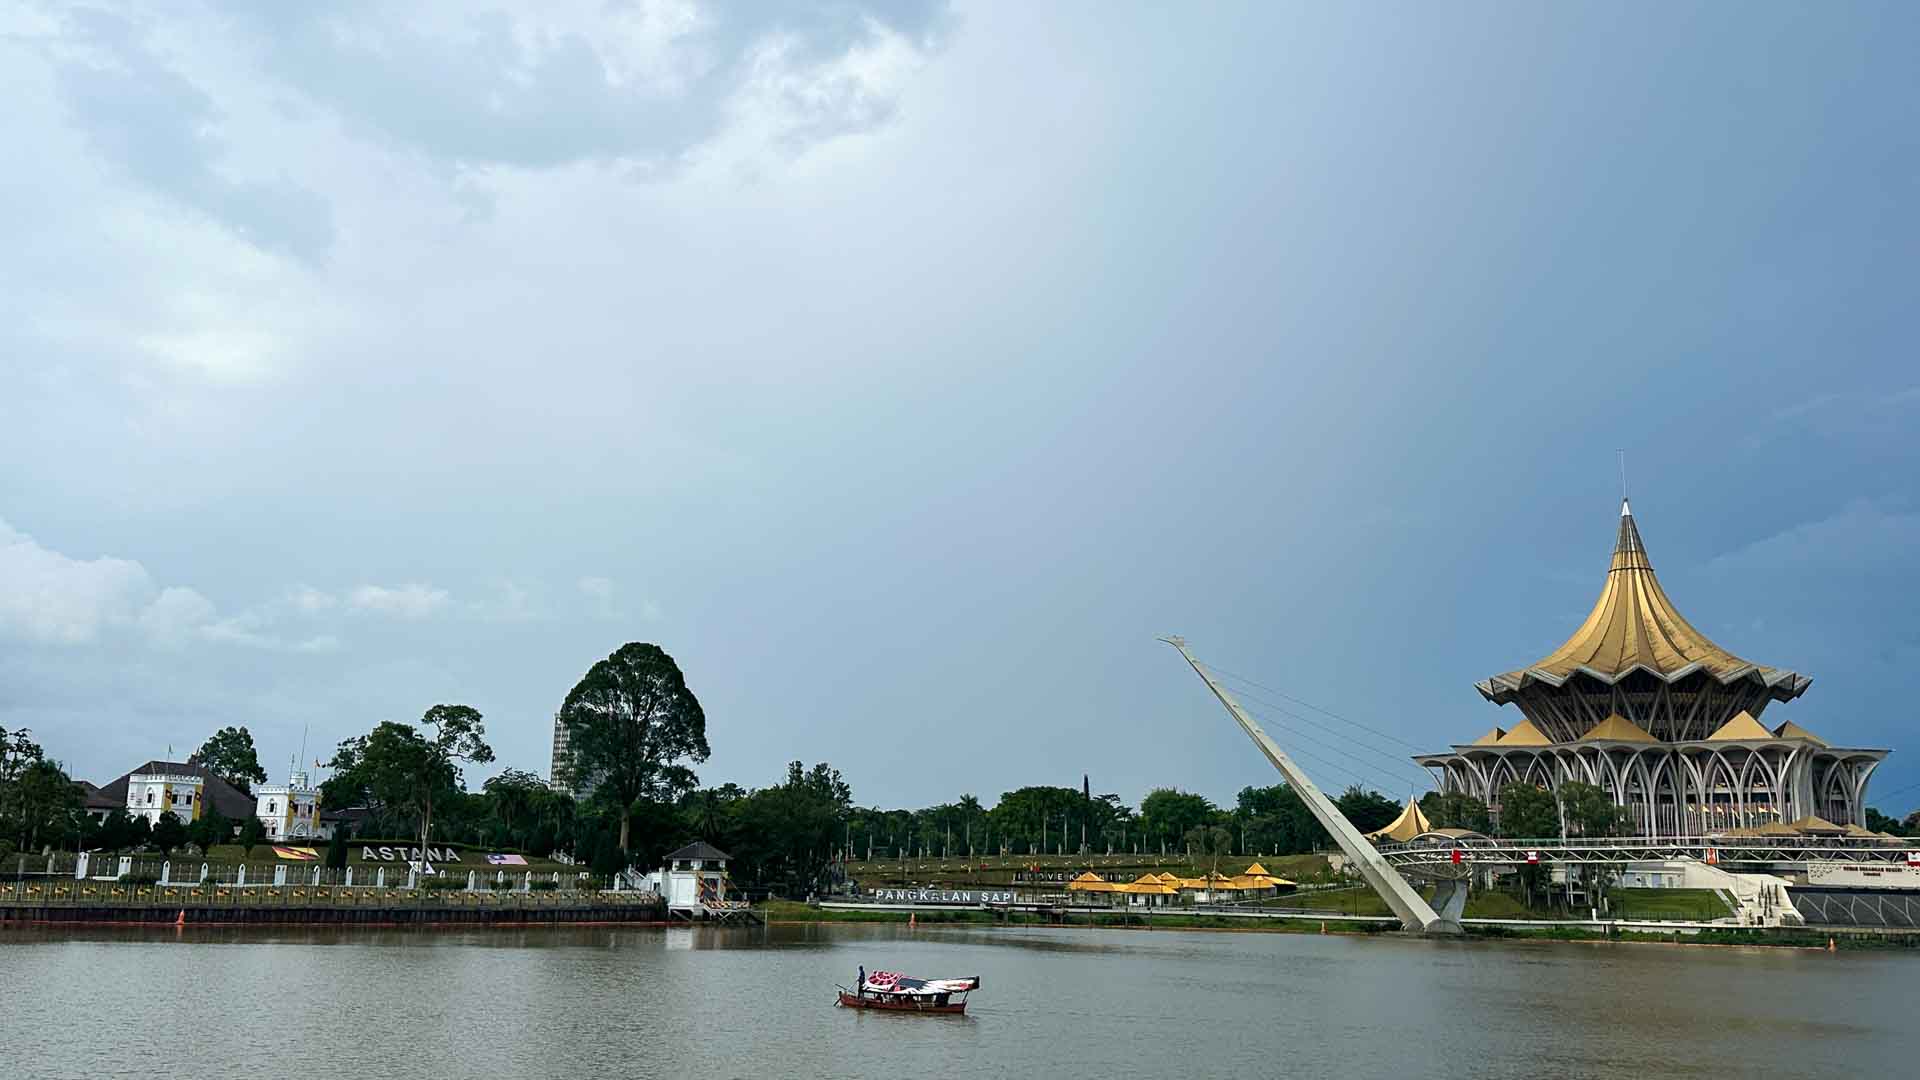 The Astana on the River in Kuching